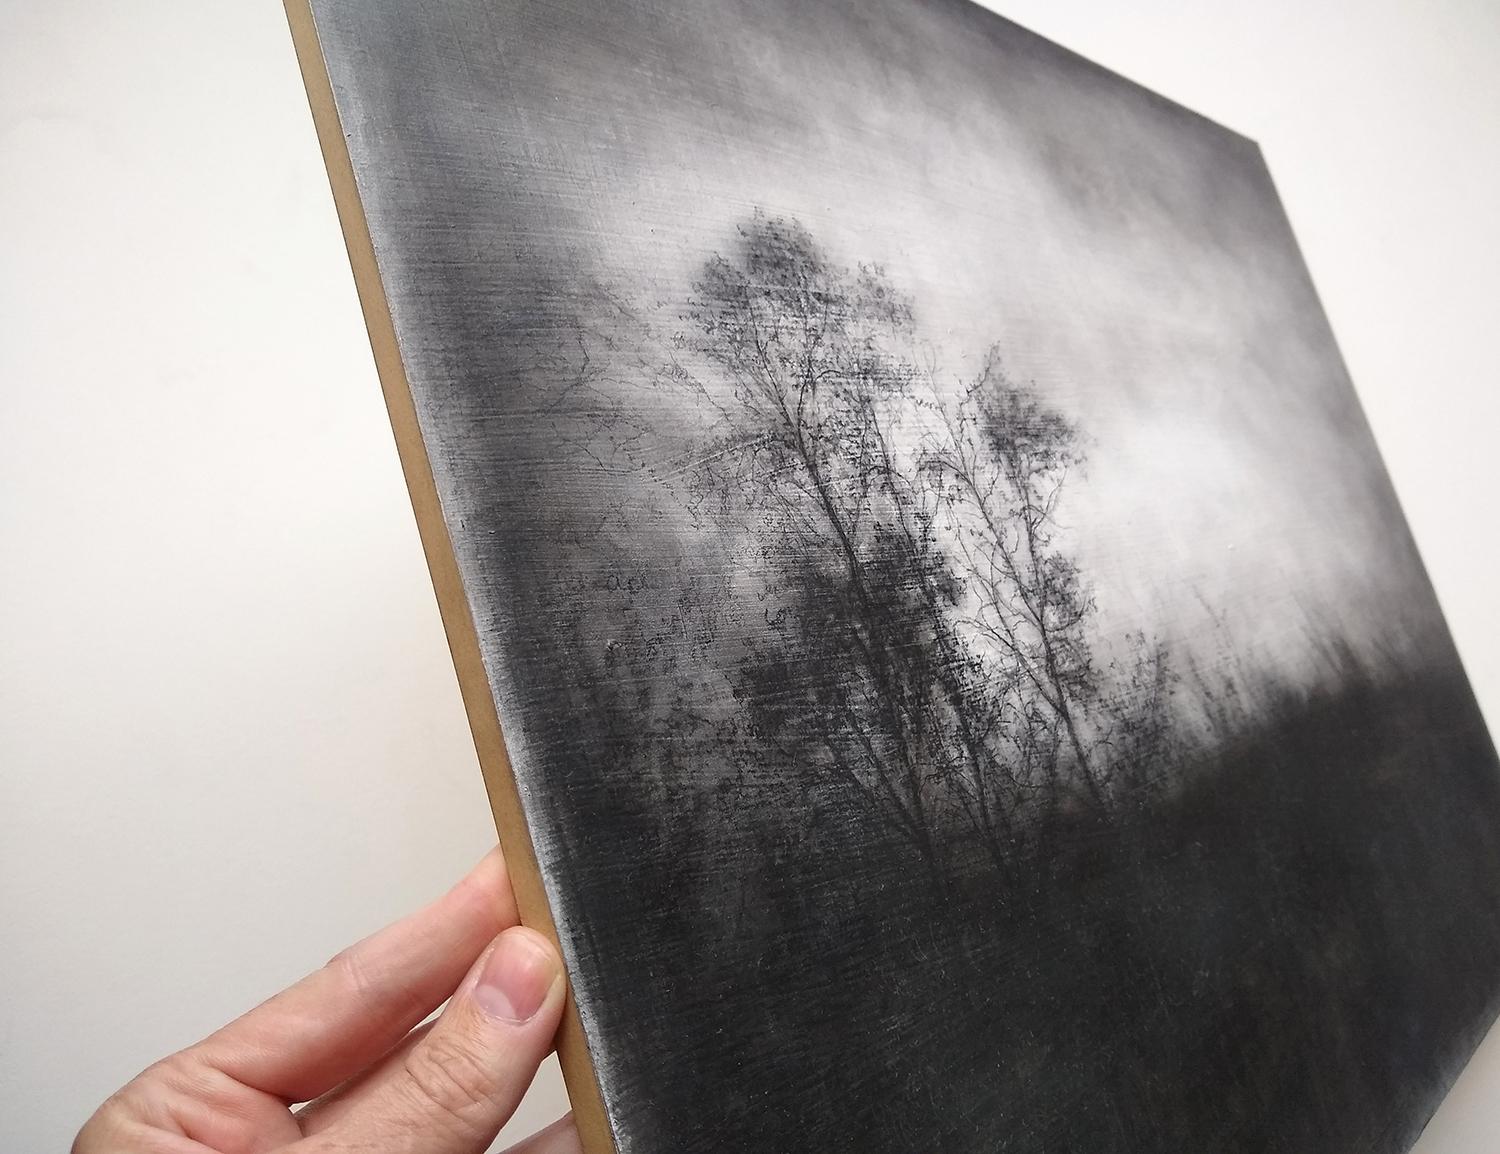 Sue Bryan
Vestigial Landscape, 2019
Black and White realistic charcoal landscape drawing of trees in the countryside
18